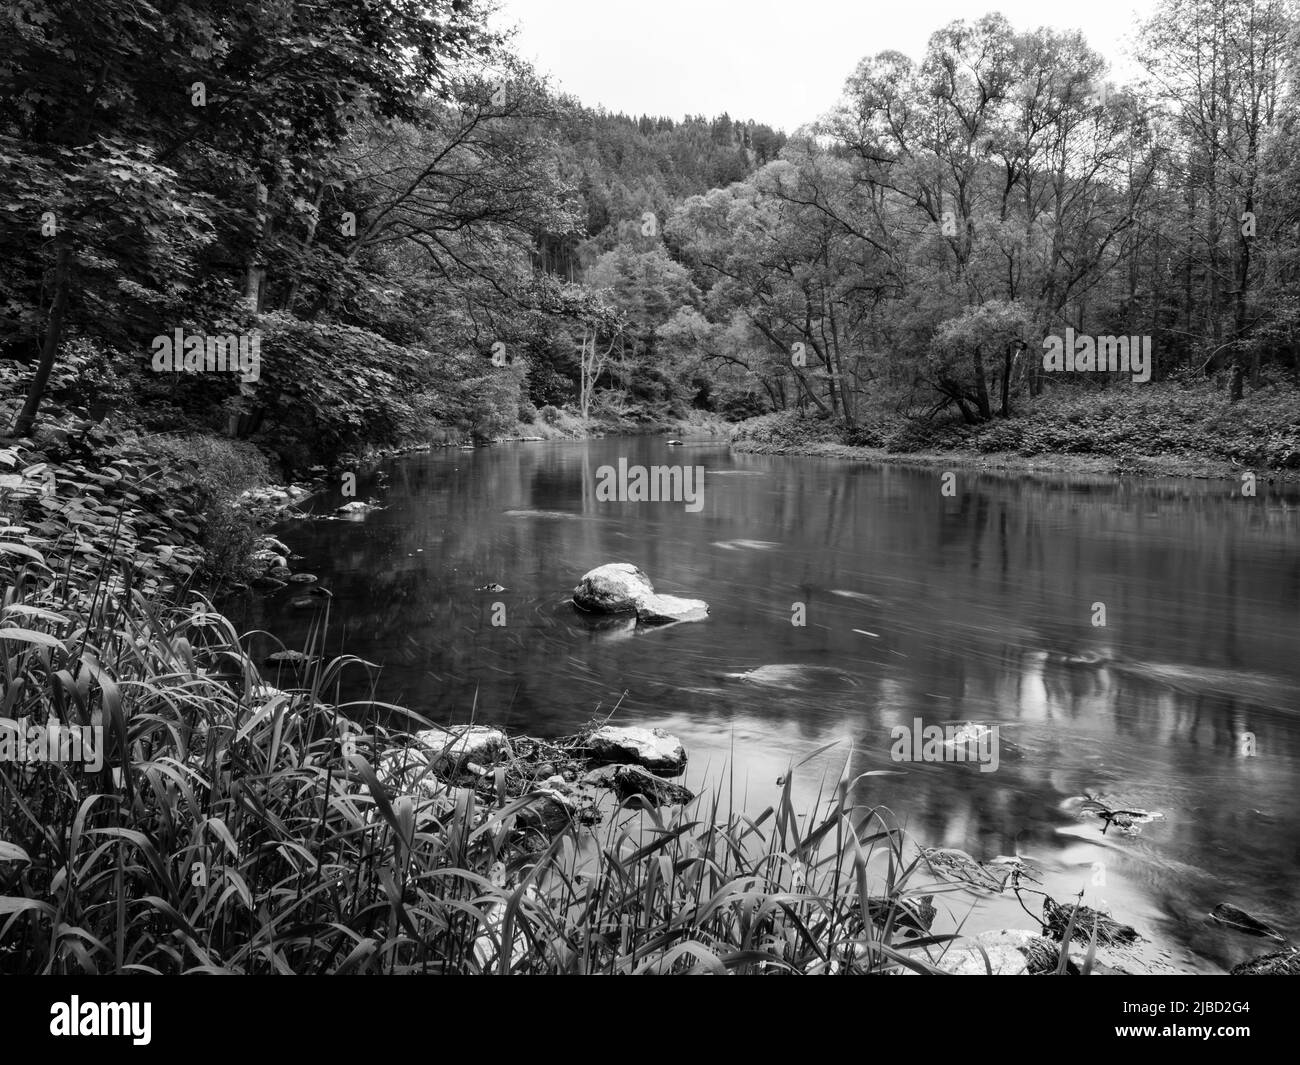 River Ohre or Eger Black and White Landscape near Carlsbad or Karlovy Vary in Western Bohemia, Czech Republic Stock Photo